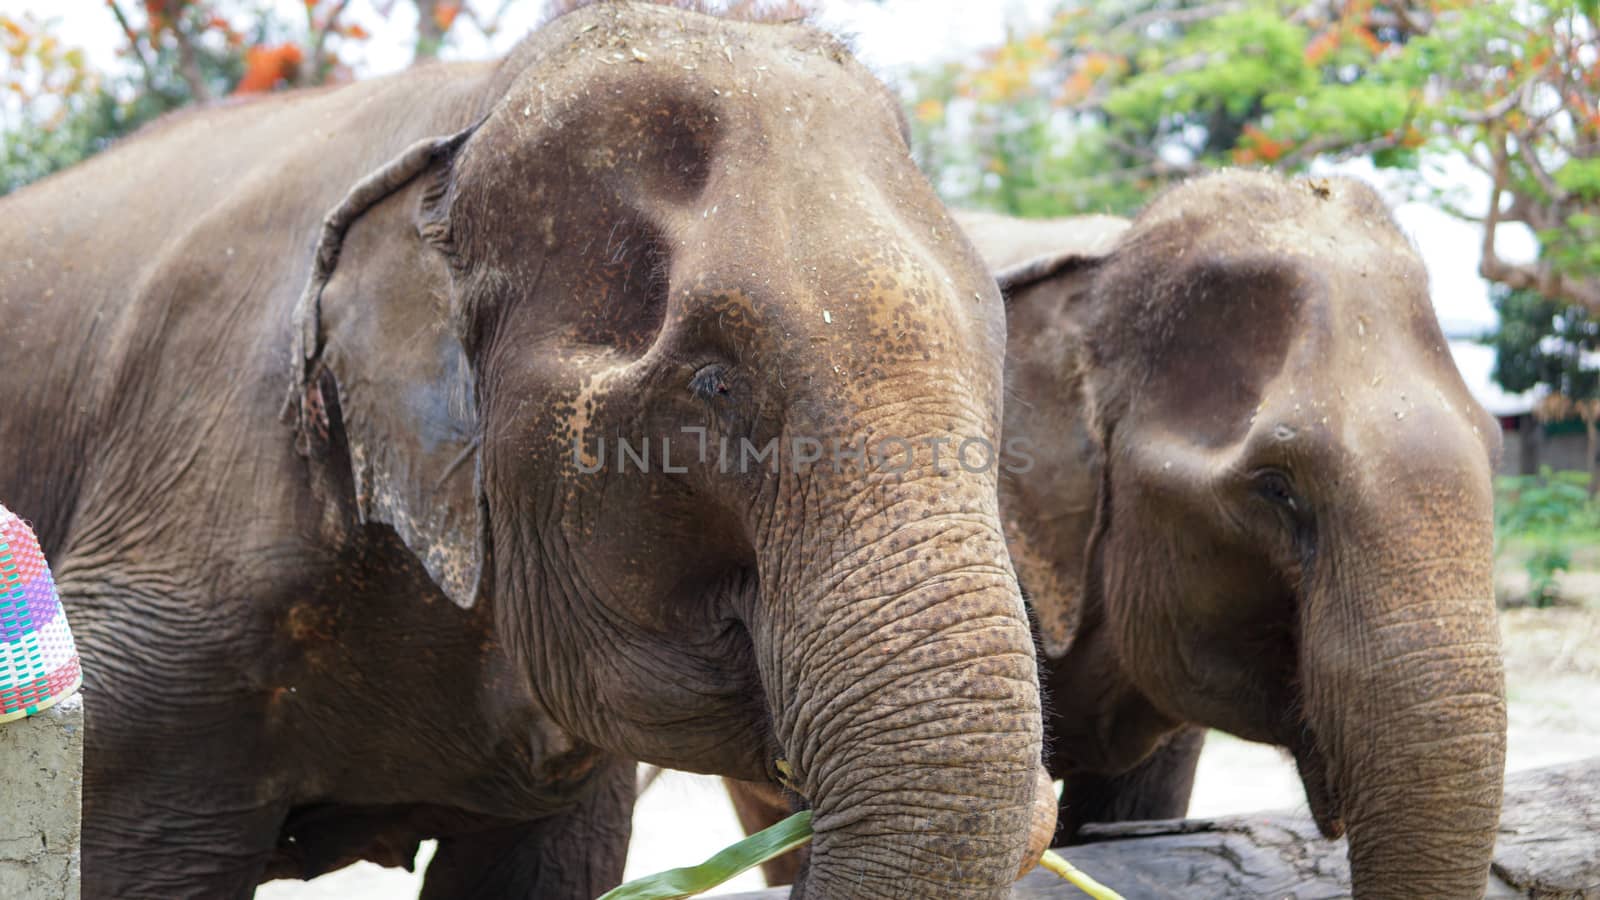 Group of adult elephants feeding sugar cane and bamboo in Elephant Care Sanctuary, Mae Tang, Chiang Mai province, Thailand.